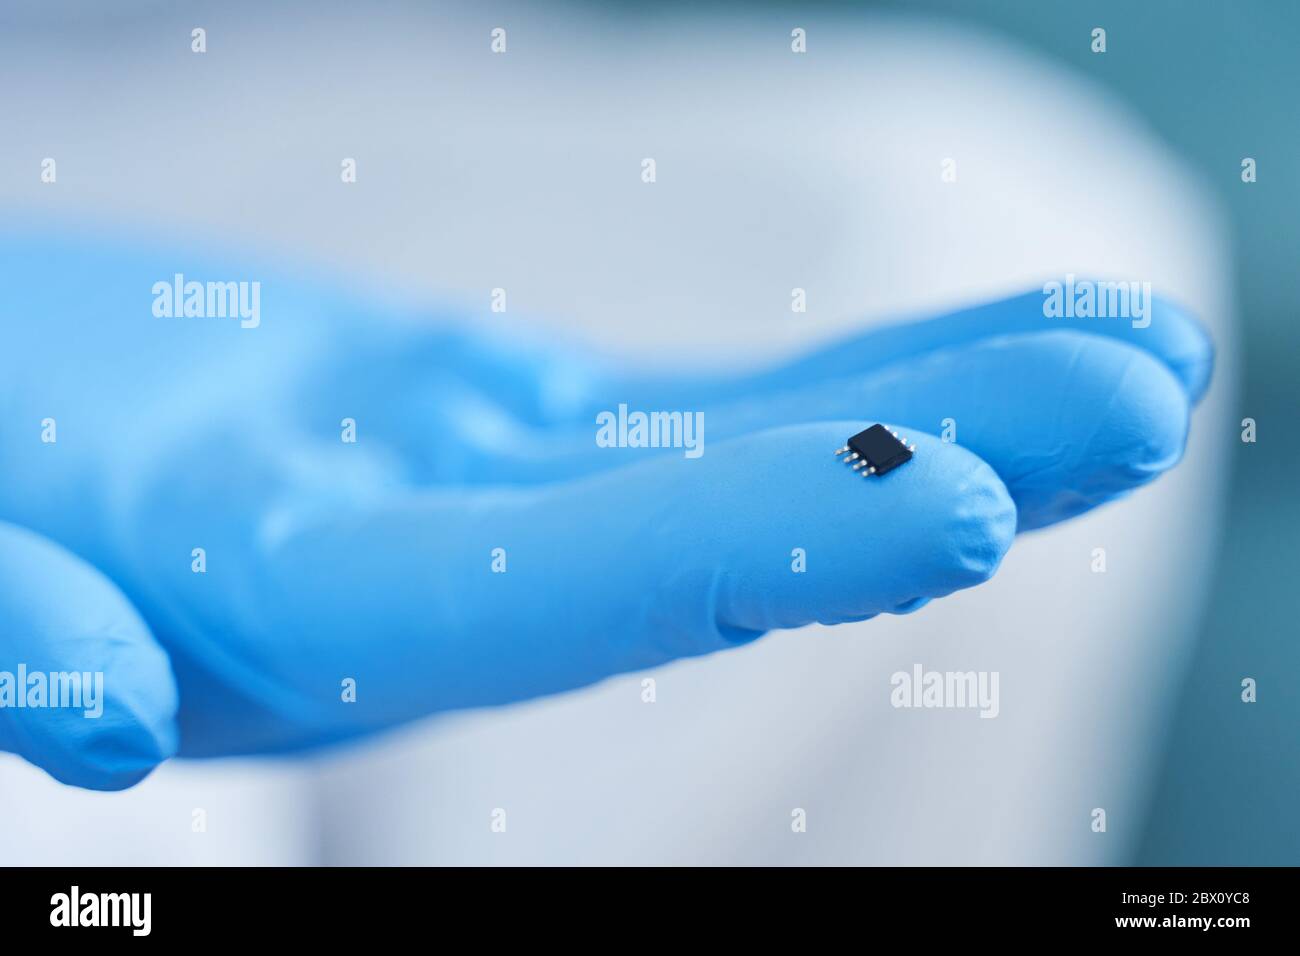 Hand holds chip compenent. Embedding the chip under human skin, microcontroller implanting NFC technology Stock Photo